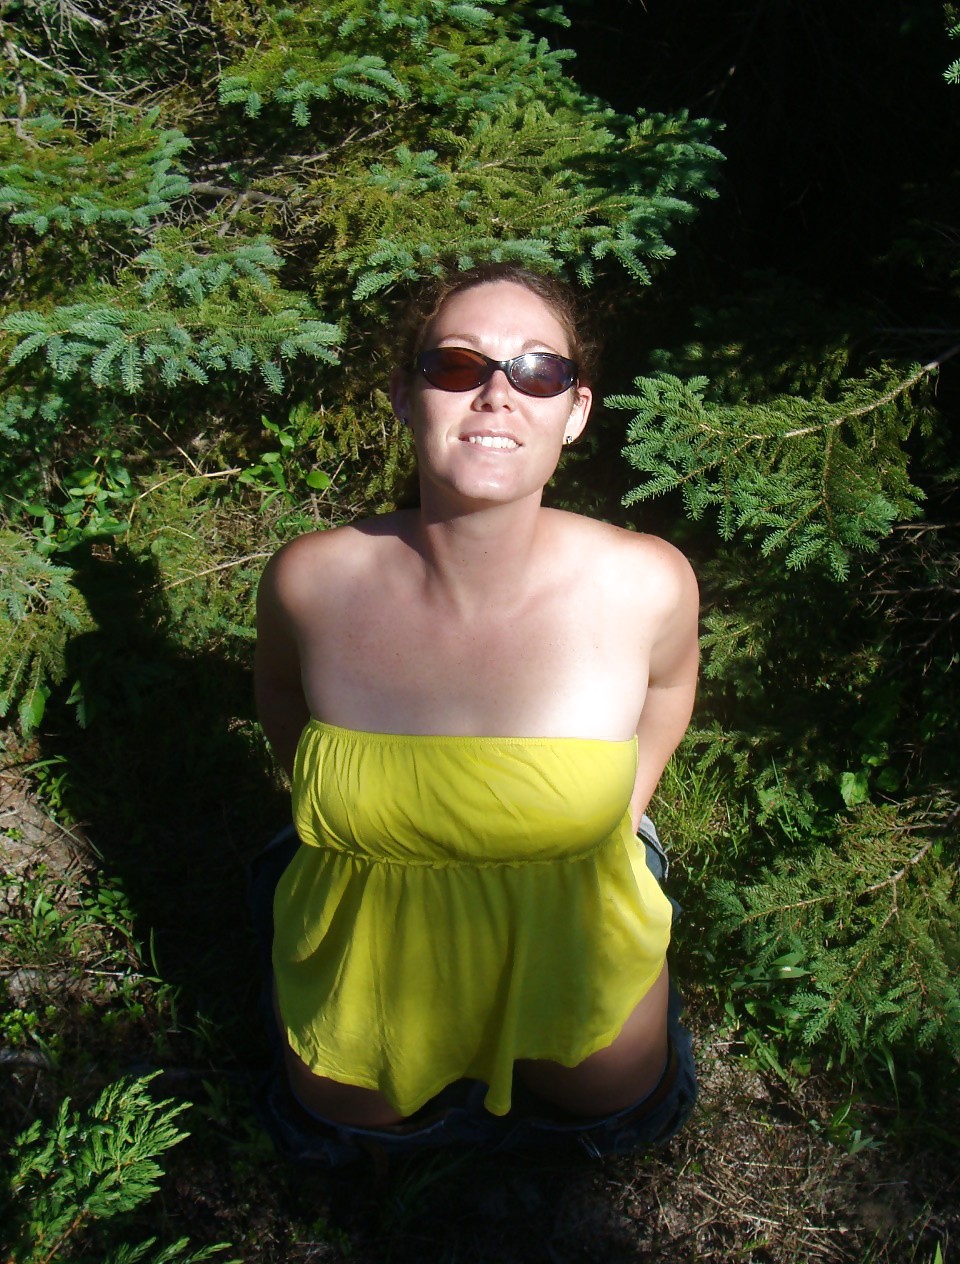 Chubby Milf in the forest #10712012